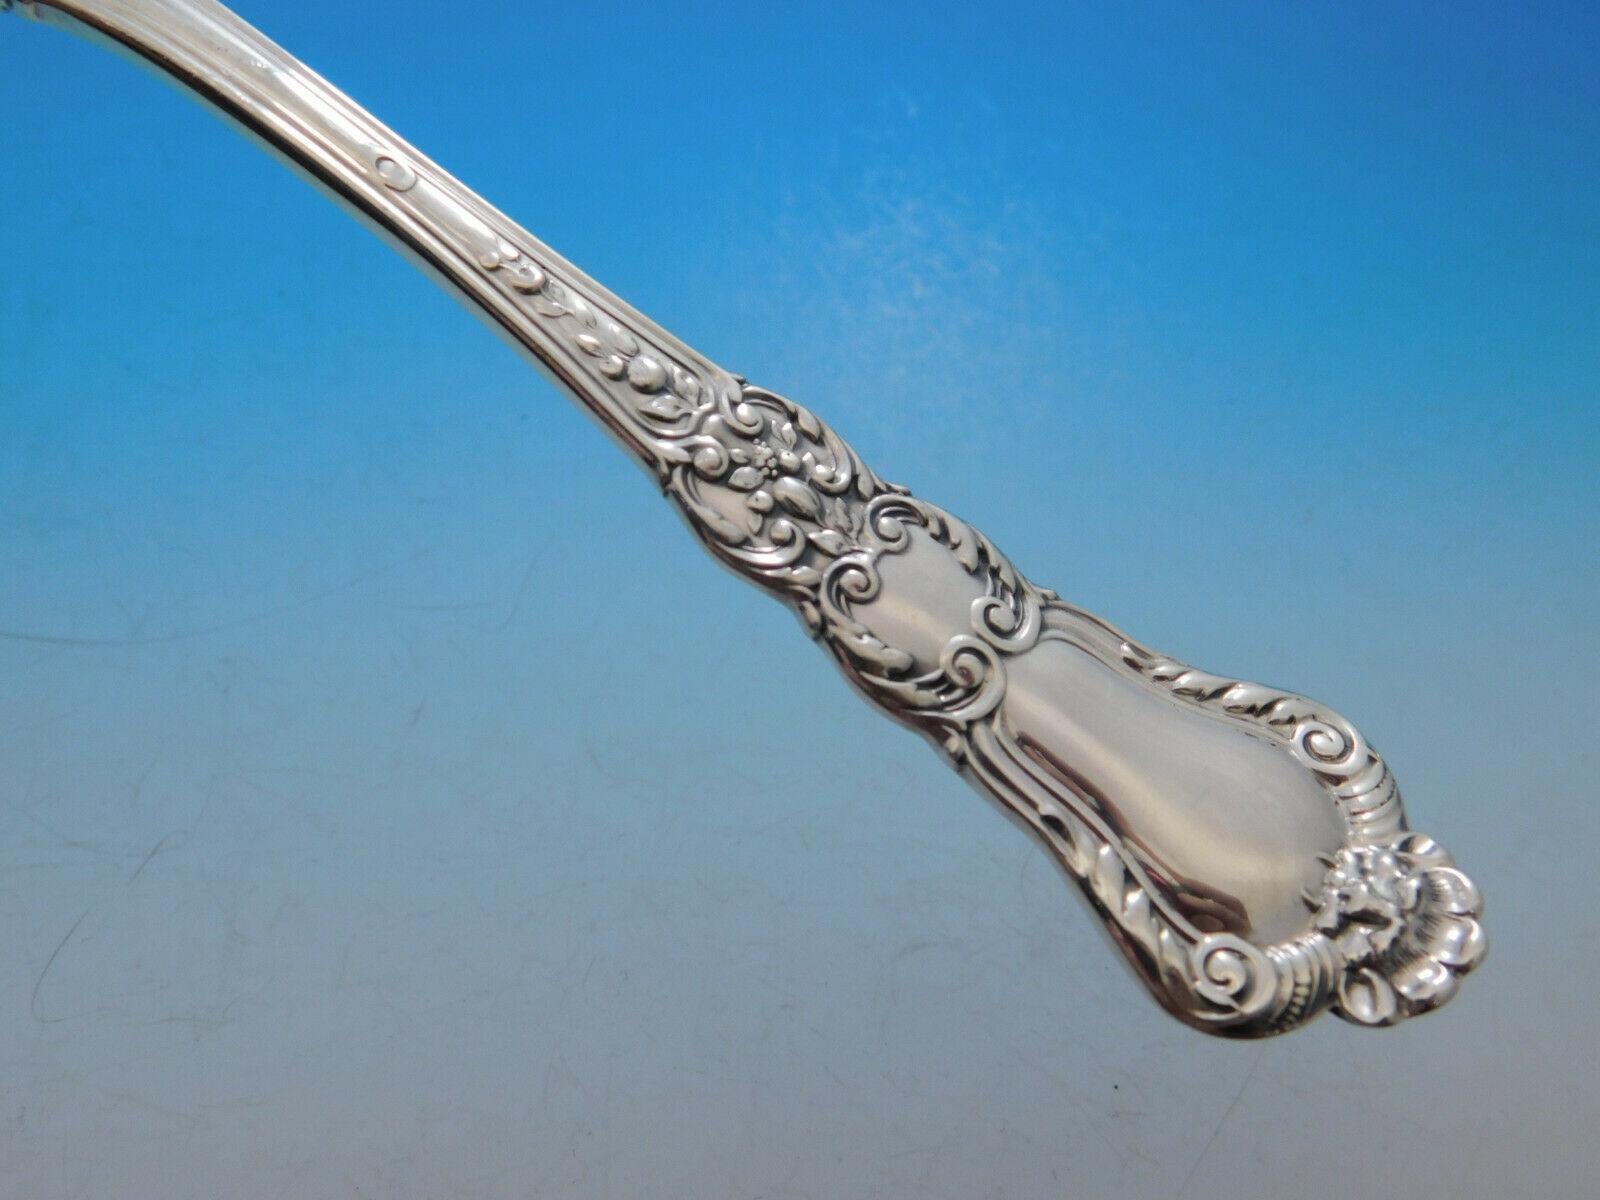 Incredible monumental dinner & Luncheon size old Baronial by Gorham sterling silver flatware set with superb lion motif, 507 pieces. This pattern was introduced by Gorham in the year 1897 with 